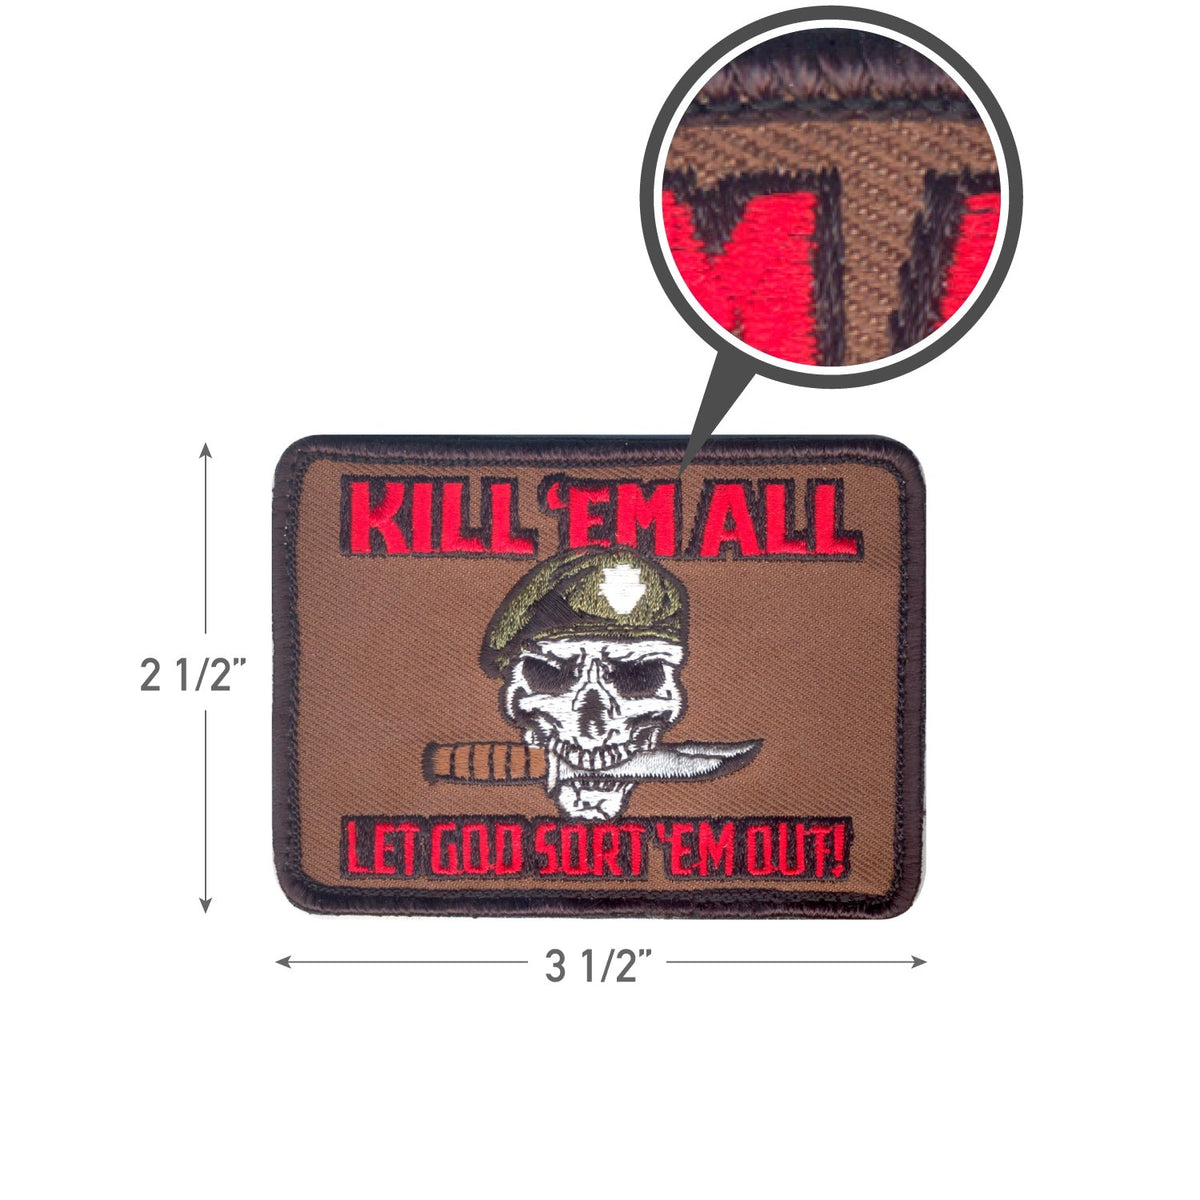 Rothco Infidel Shoulder Morale Patch